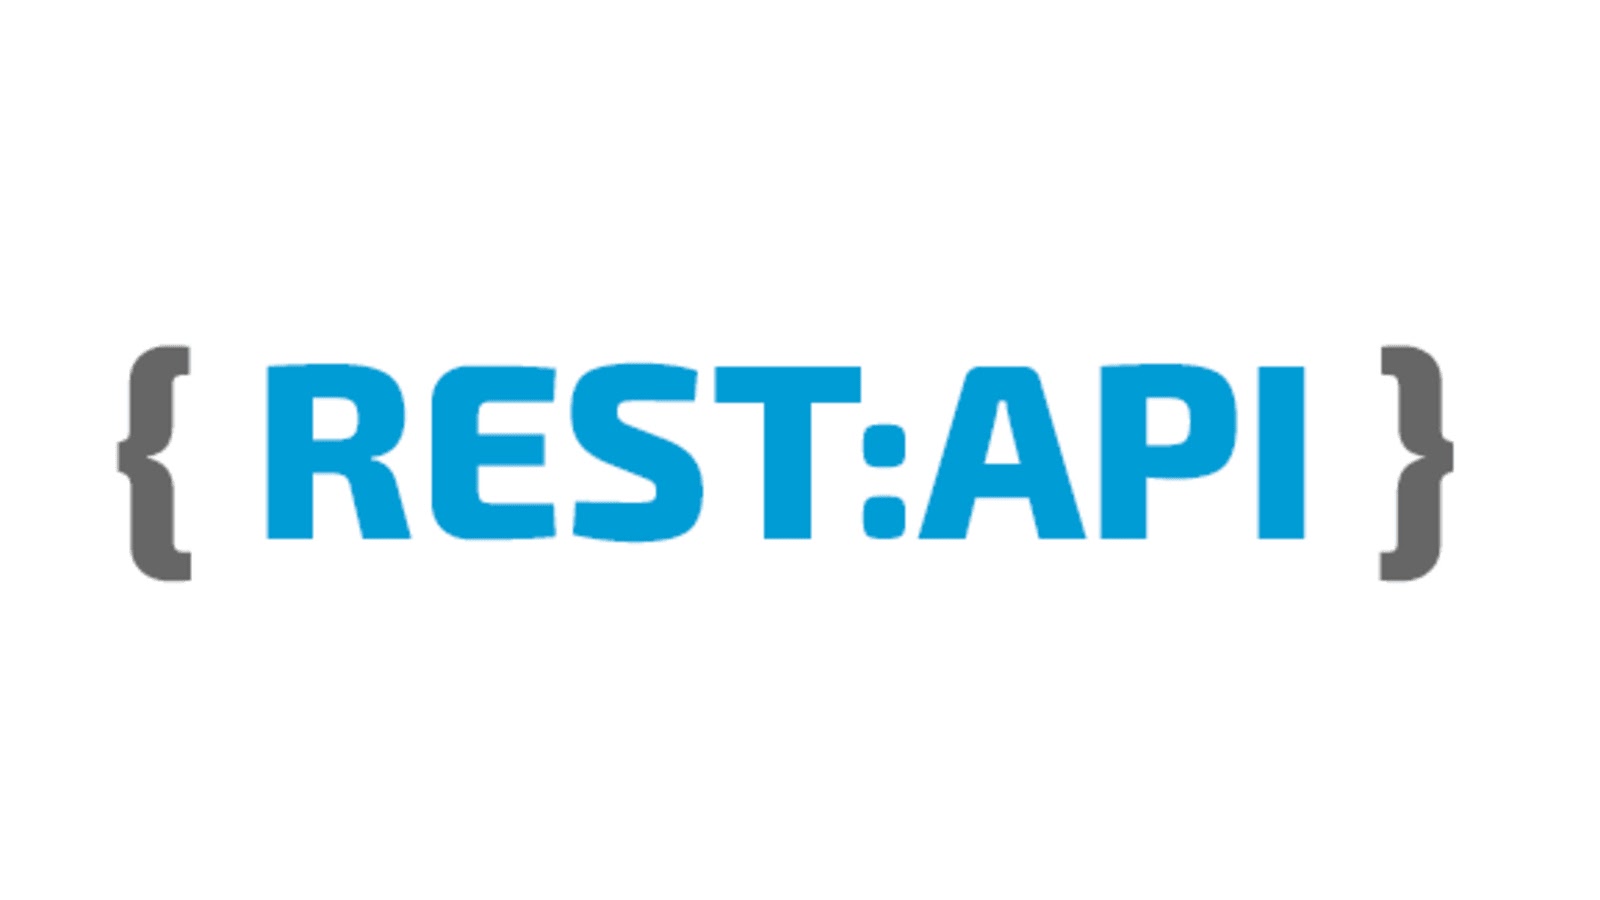 TOP 5 Practices for Rest API Testing